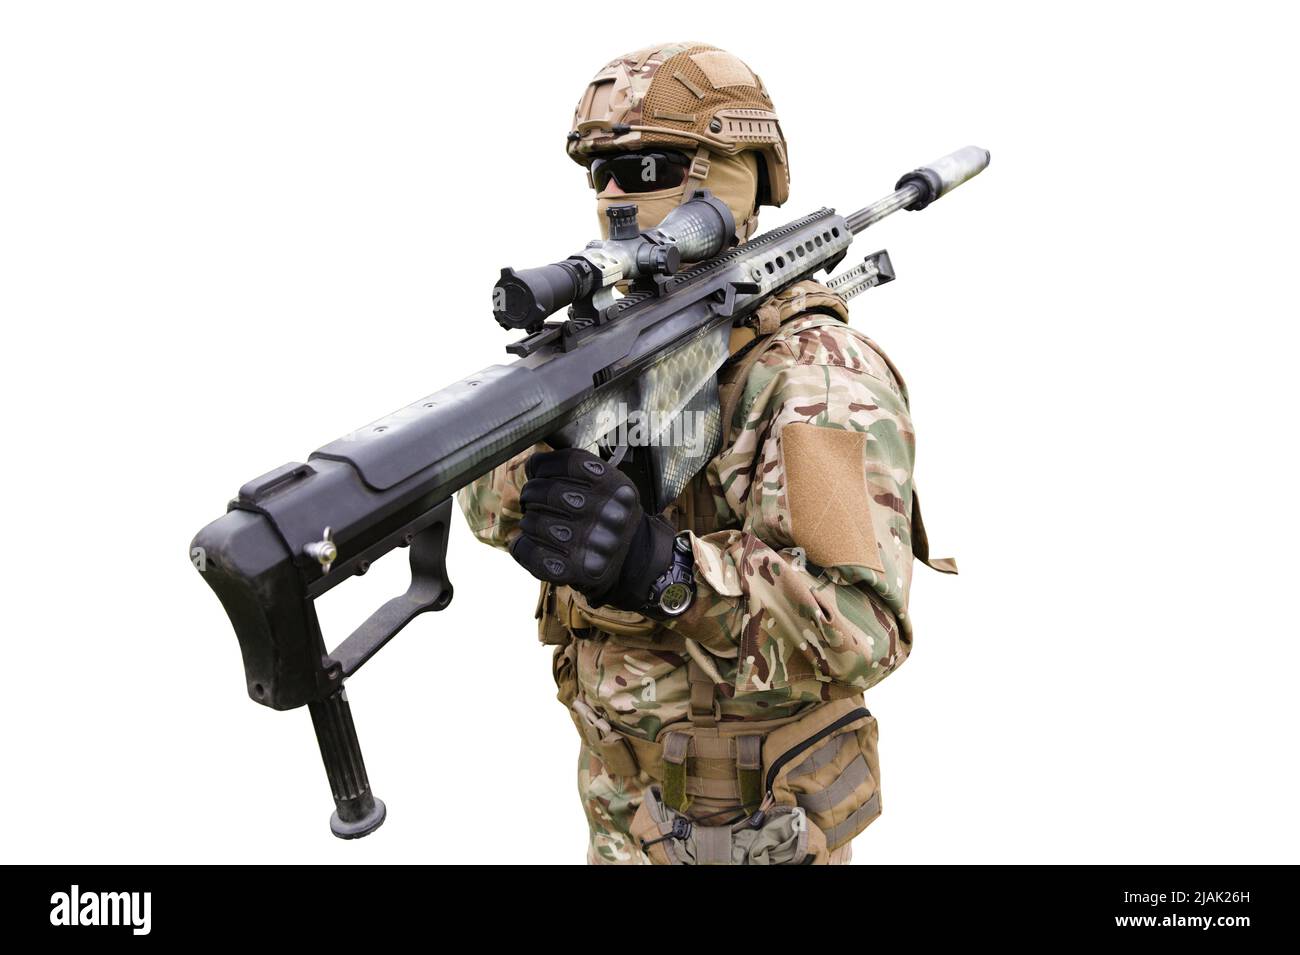 Armed special forces soldier with sniper rifle, isolated on white background Stock Photo